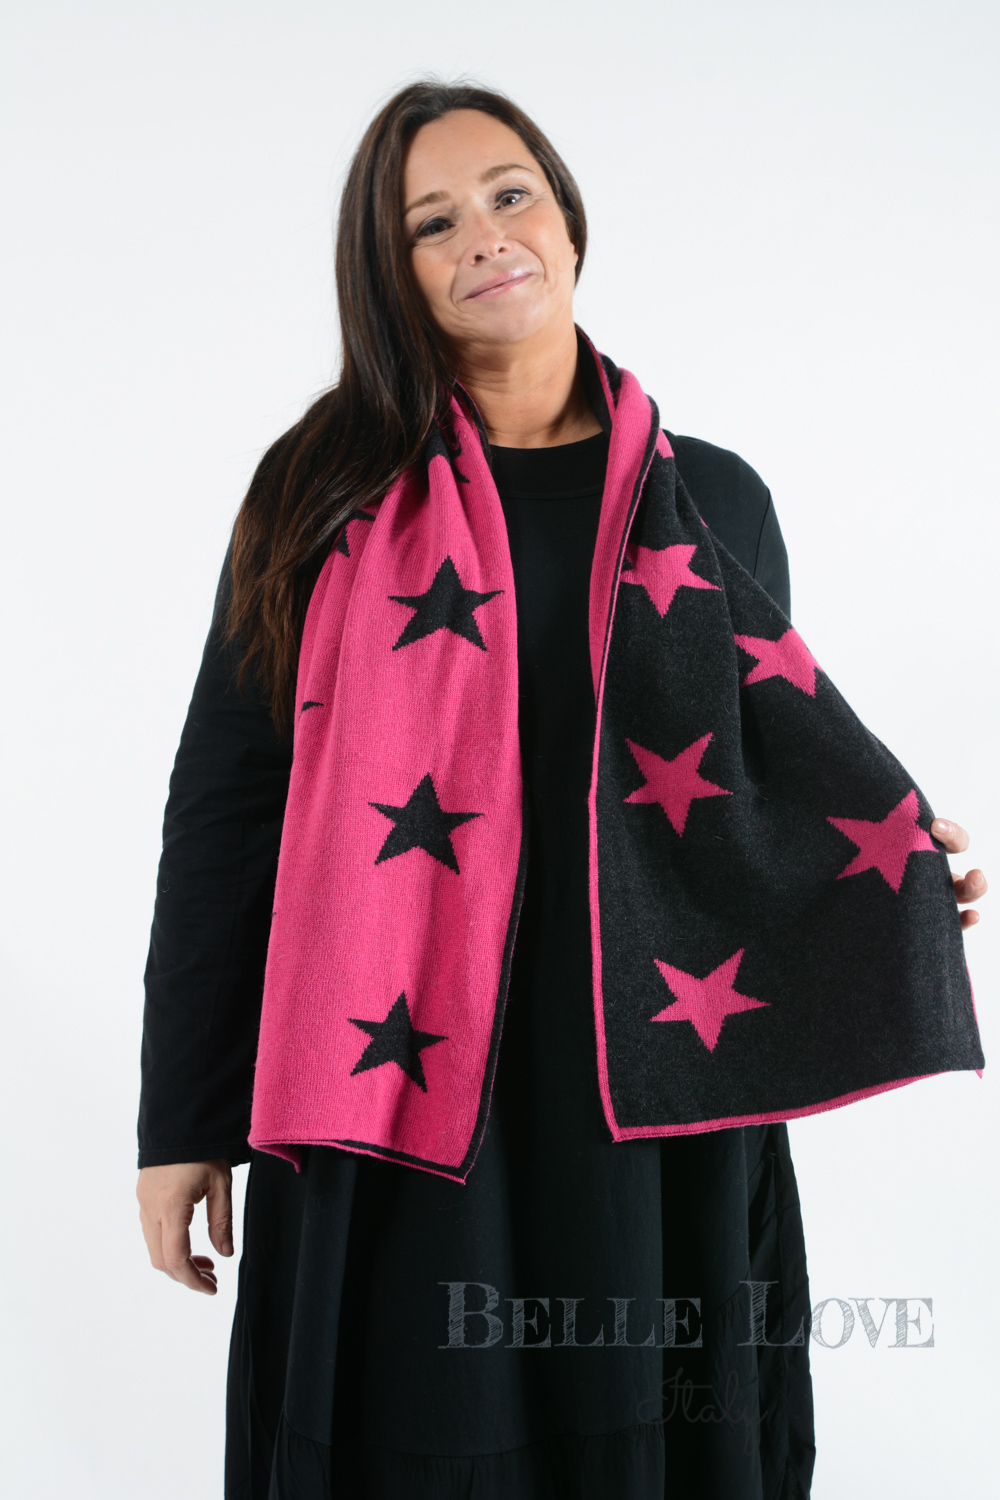 Belle Love Italy Luxury Mix Star Scarf